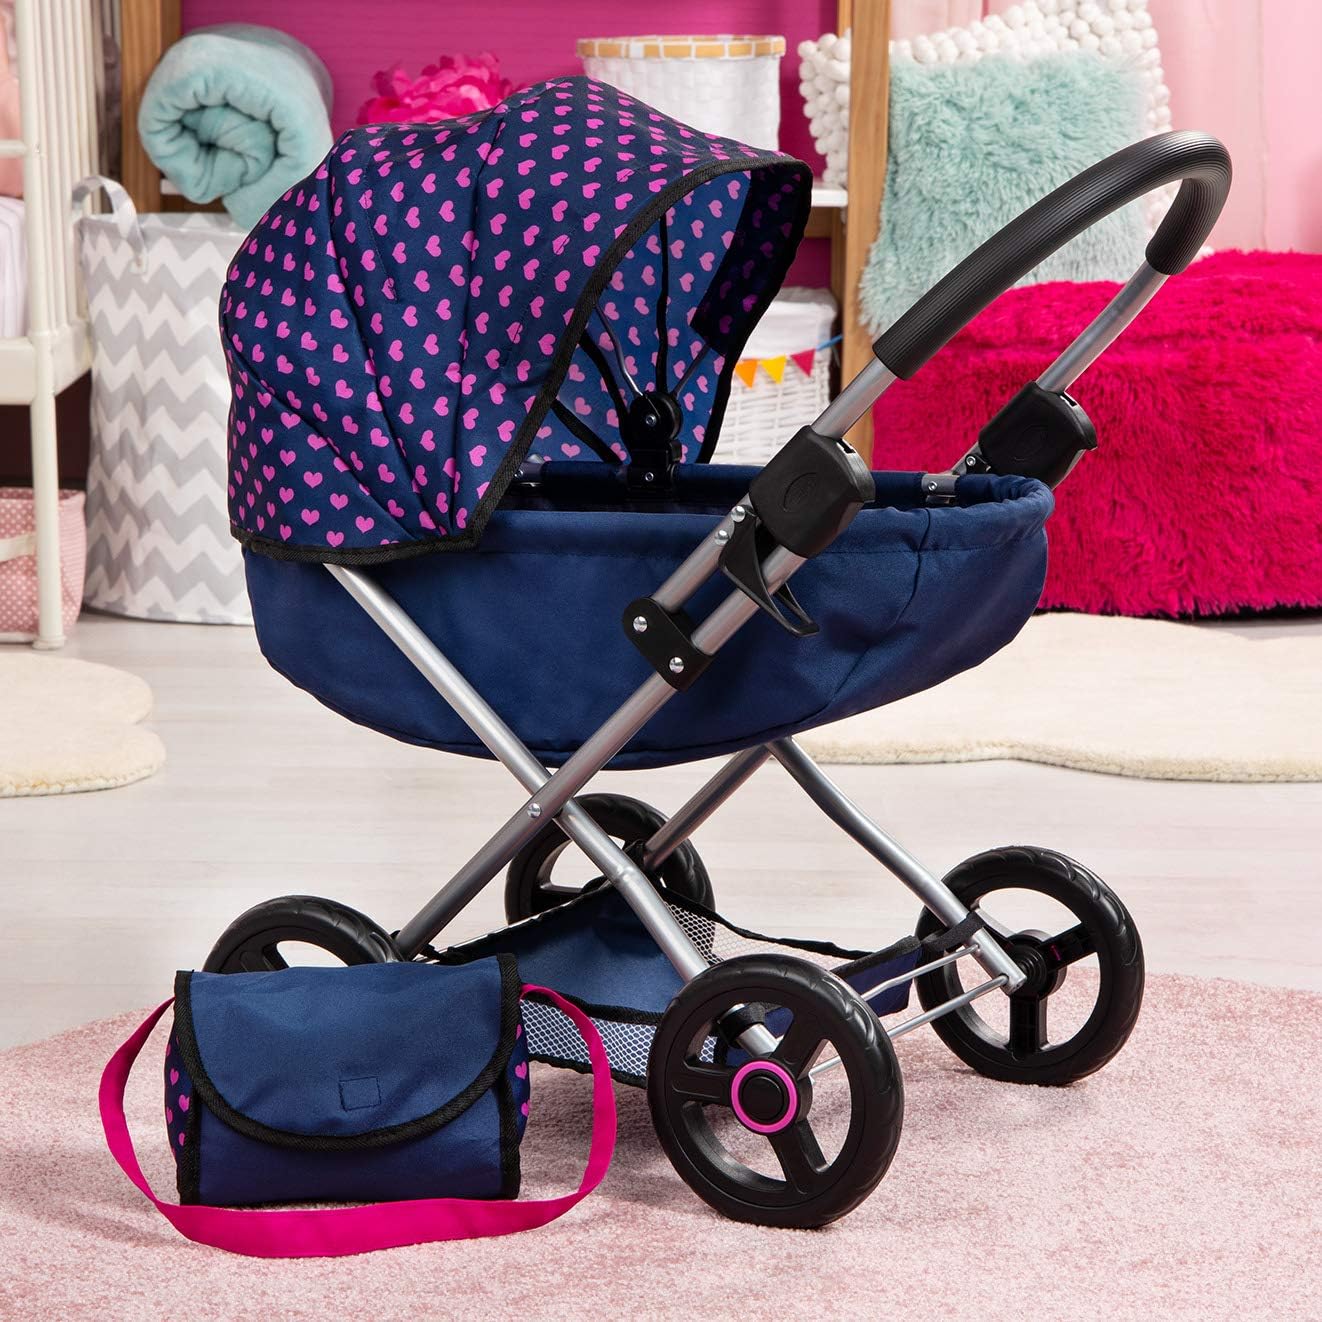 Bayer Dolls 4-in-1 Toy Baby Doll Pram Stroller Cosy Set - Dolls up to 18" (Blue/Purple) - image 9 of 10